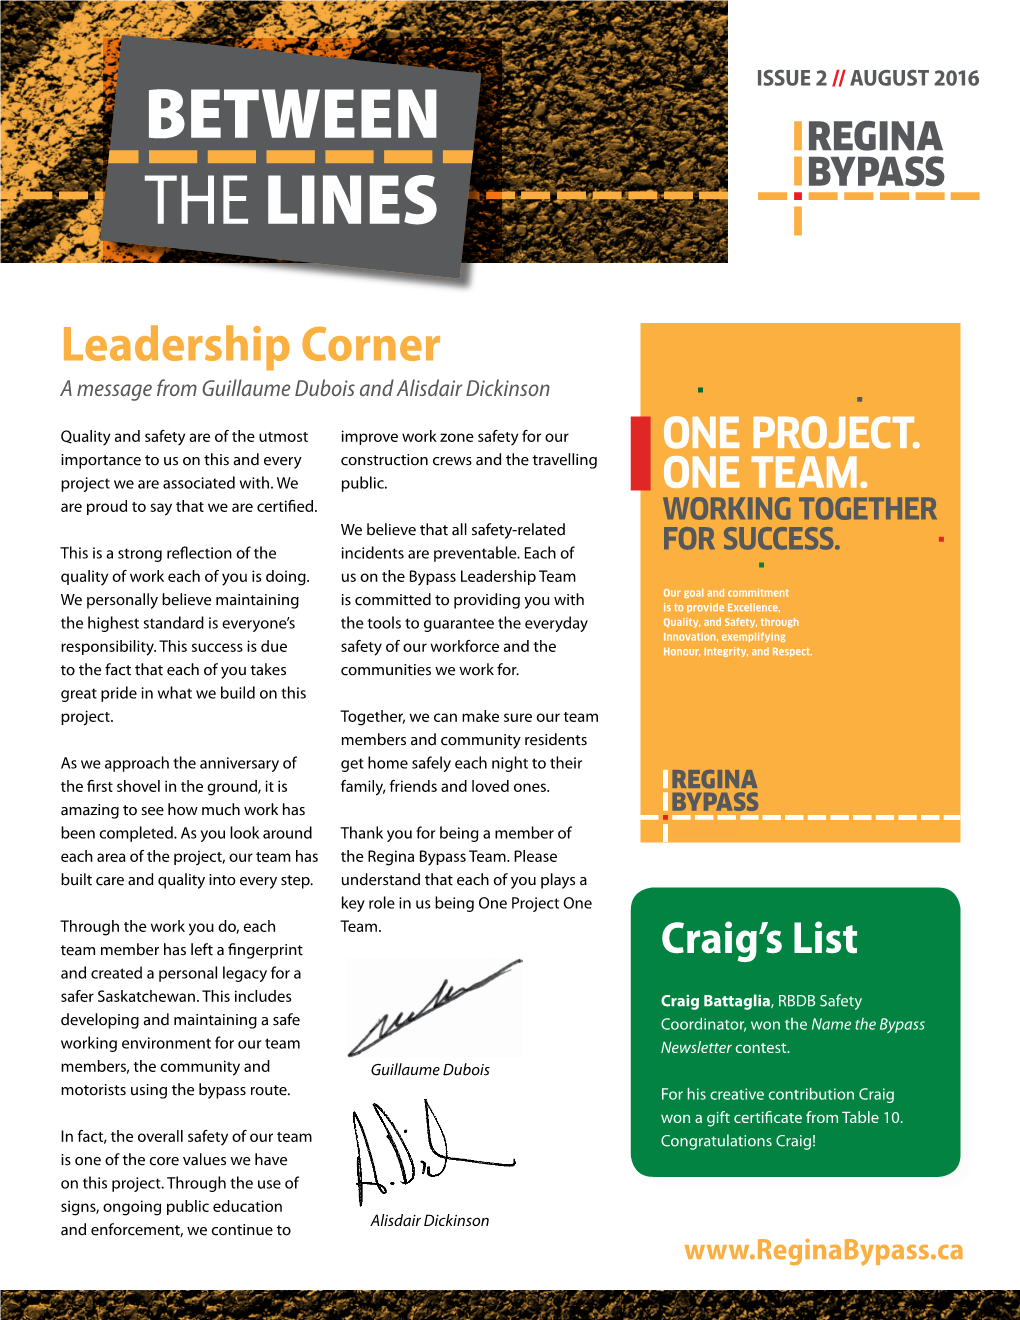 Leadership Corner a Message from Guillaume Dubois and Alisdair Dickinson